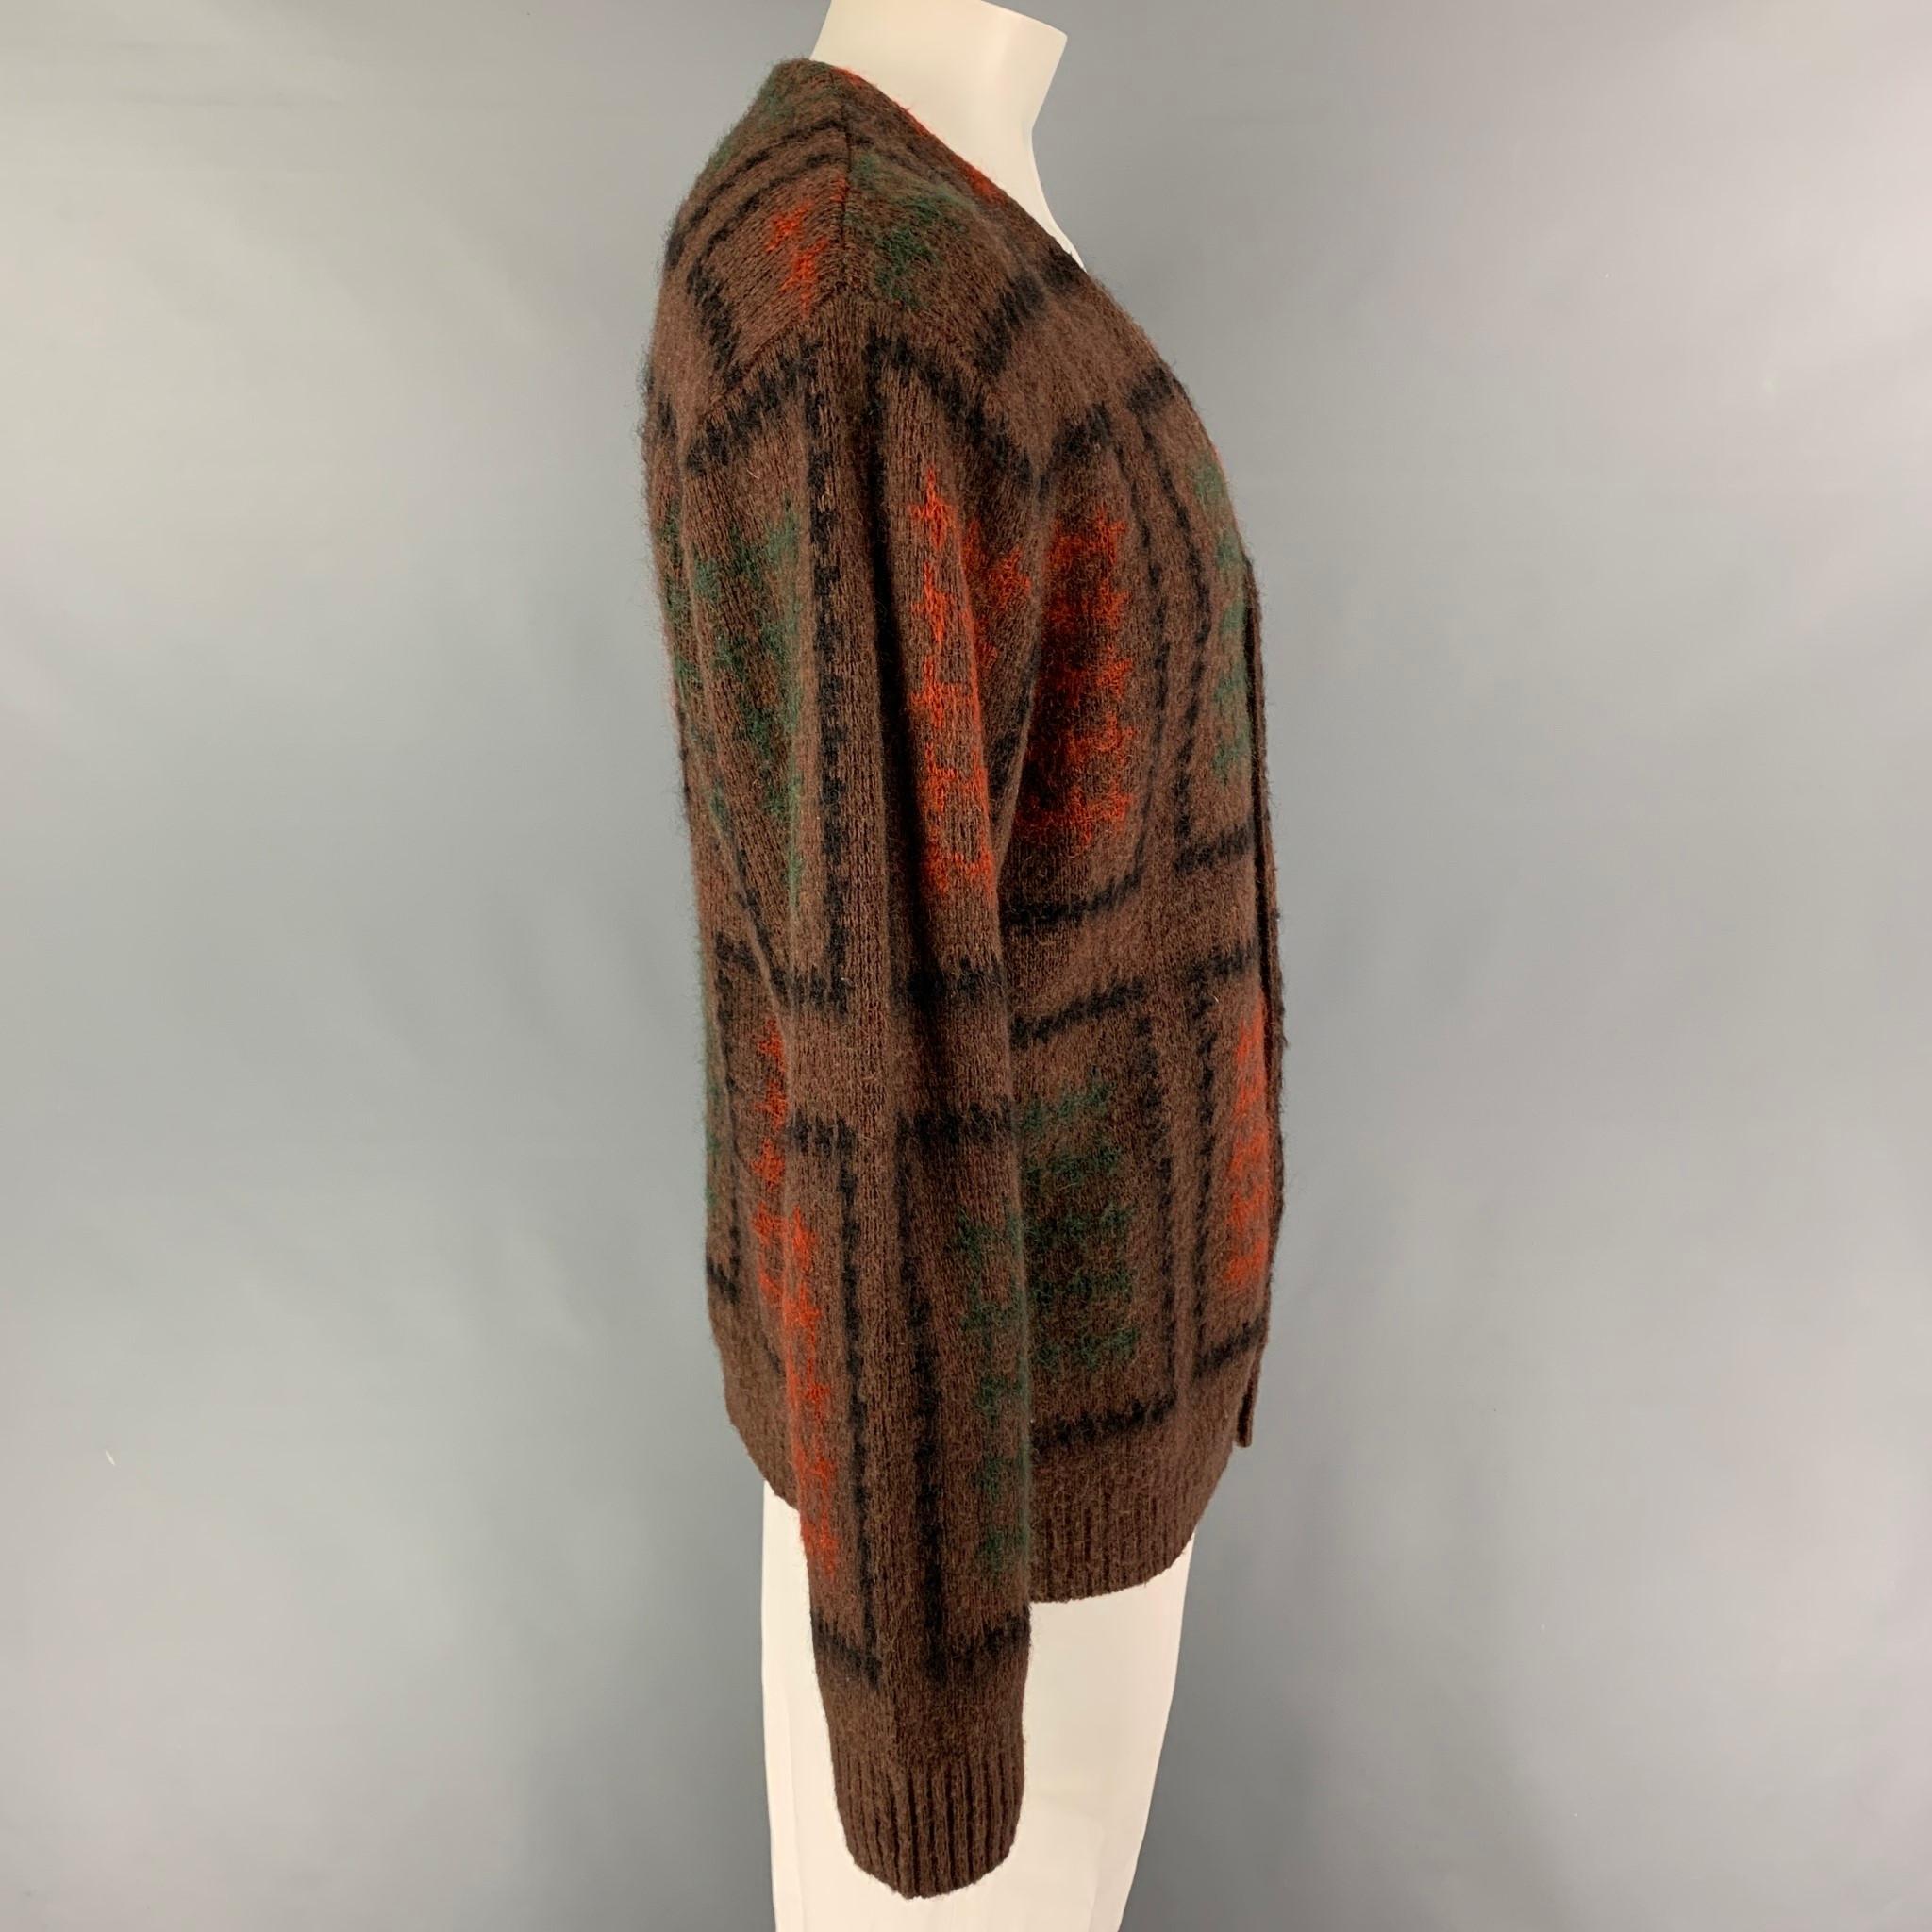 BEAMS PLUS cardigan comes in a multi-color pattern mohair blend featuring a buttoned closure. 

Very Good Pre-Owned Condition.
Marked: XL

Measurements:

Shoulder: 21 in.
Chest: 46 in.
Sleeve: 27 in.
Length: 27.5 in. 